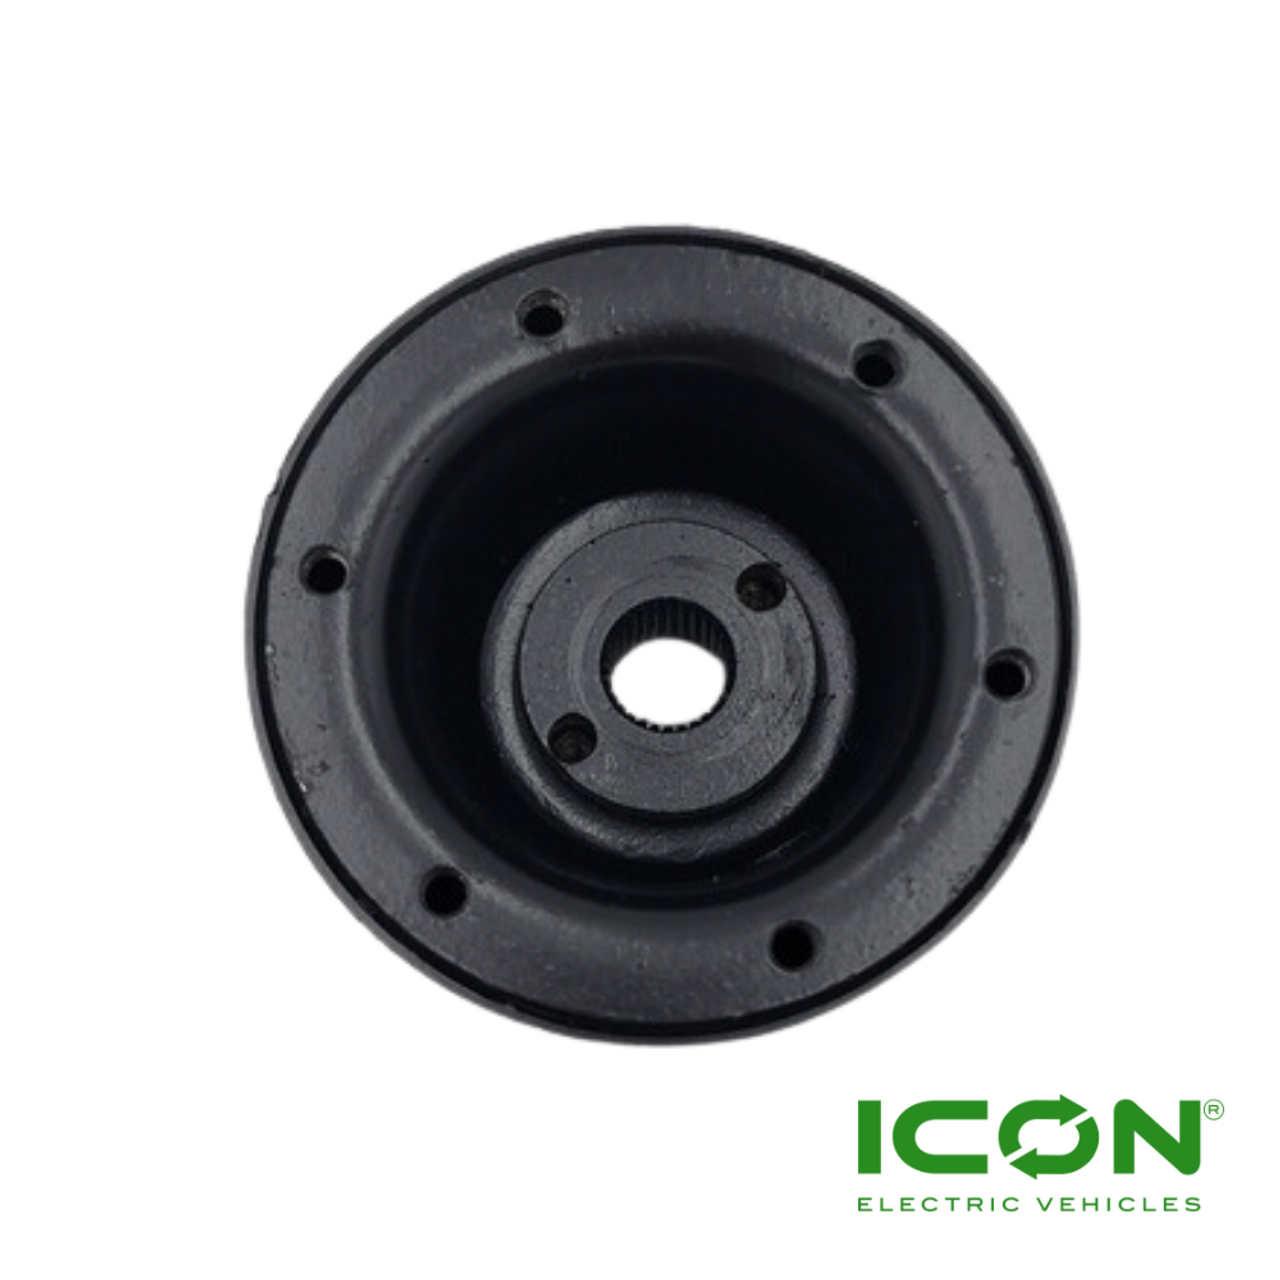 Steering Hub Adapter for ICON Golf Cart, SR-305-IC, 3.02.014.000013, 3.206.10.000017